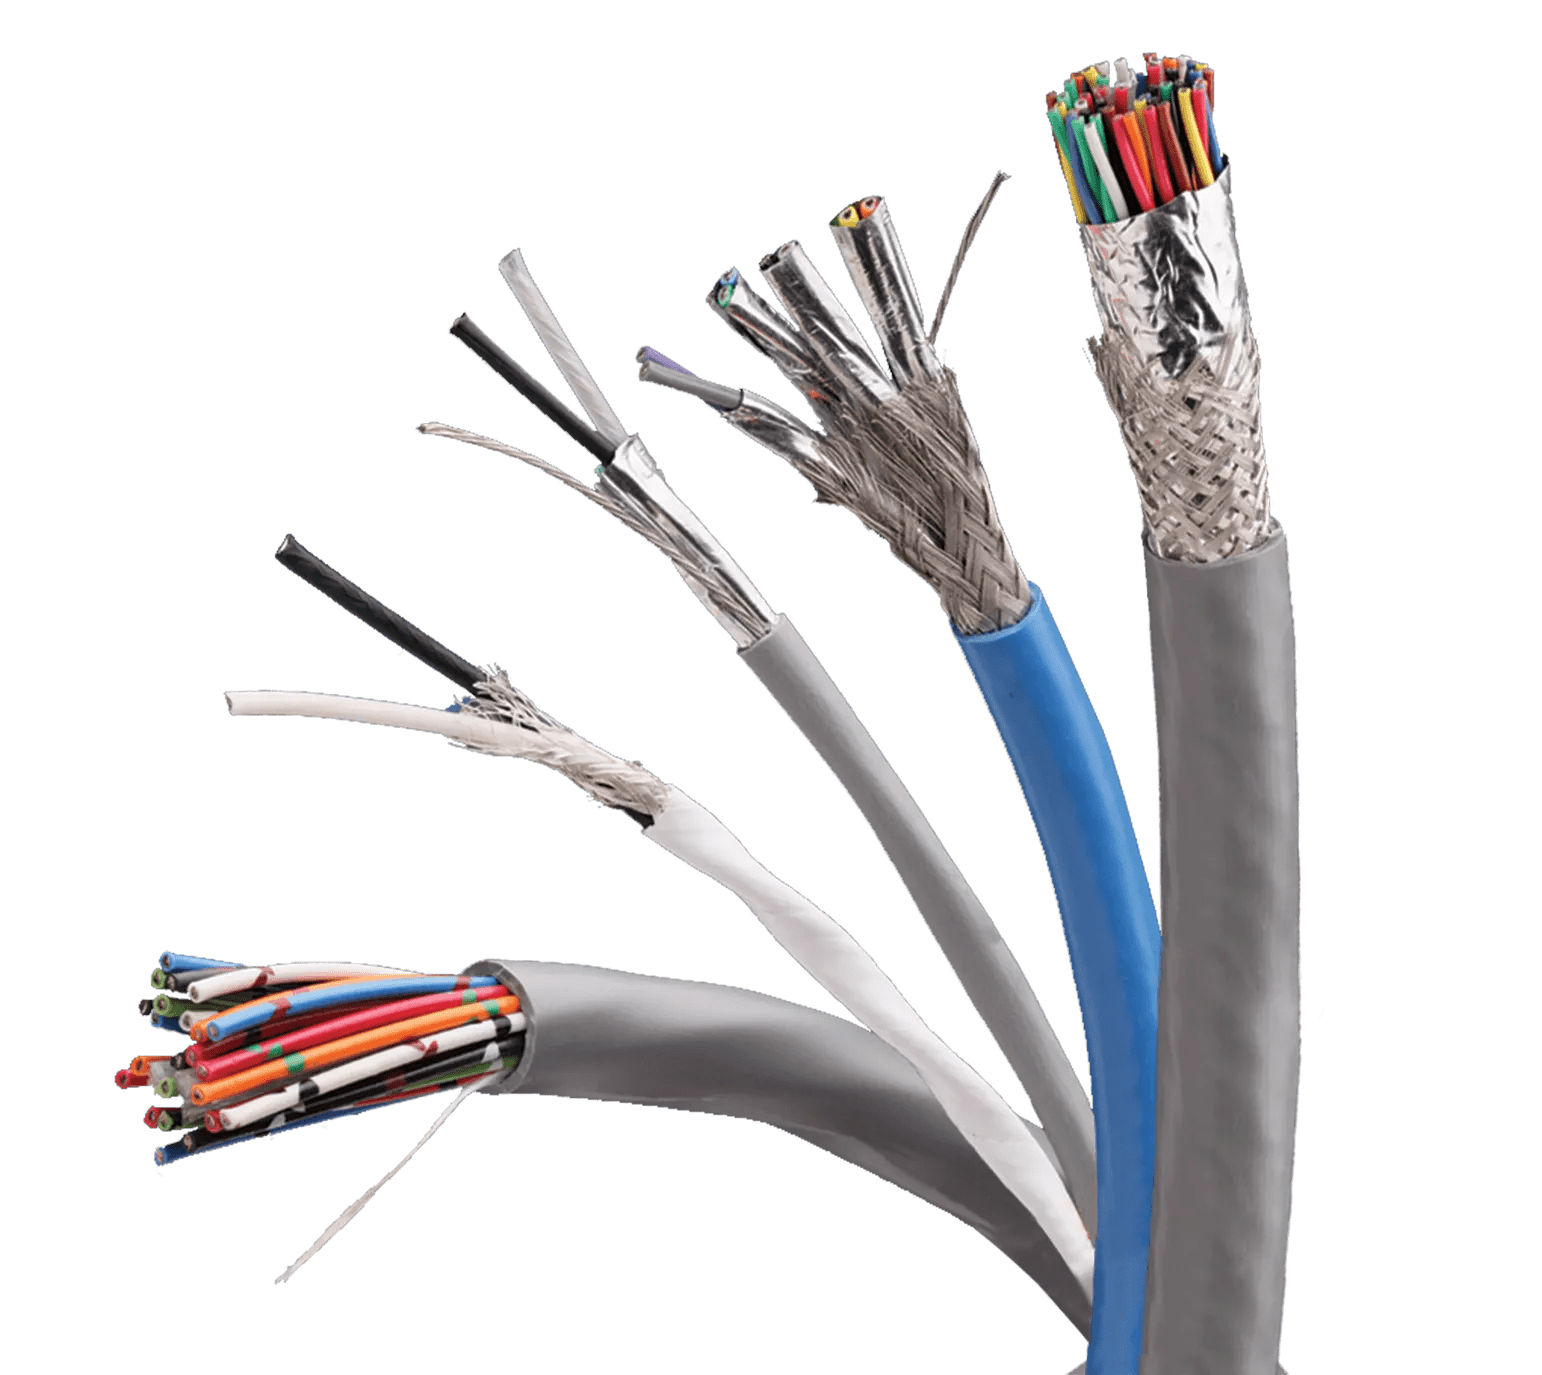 Wholesale 6mm grounding cable To Extend Power Cord Length 